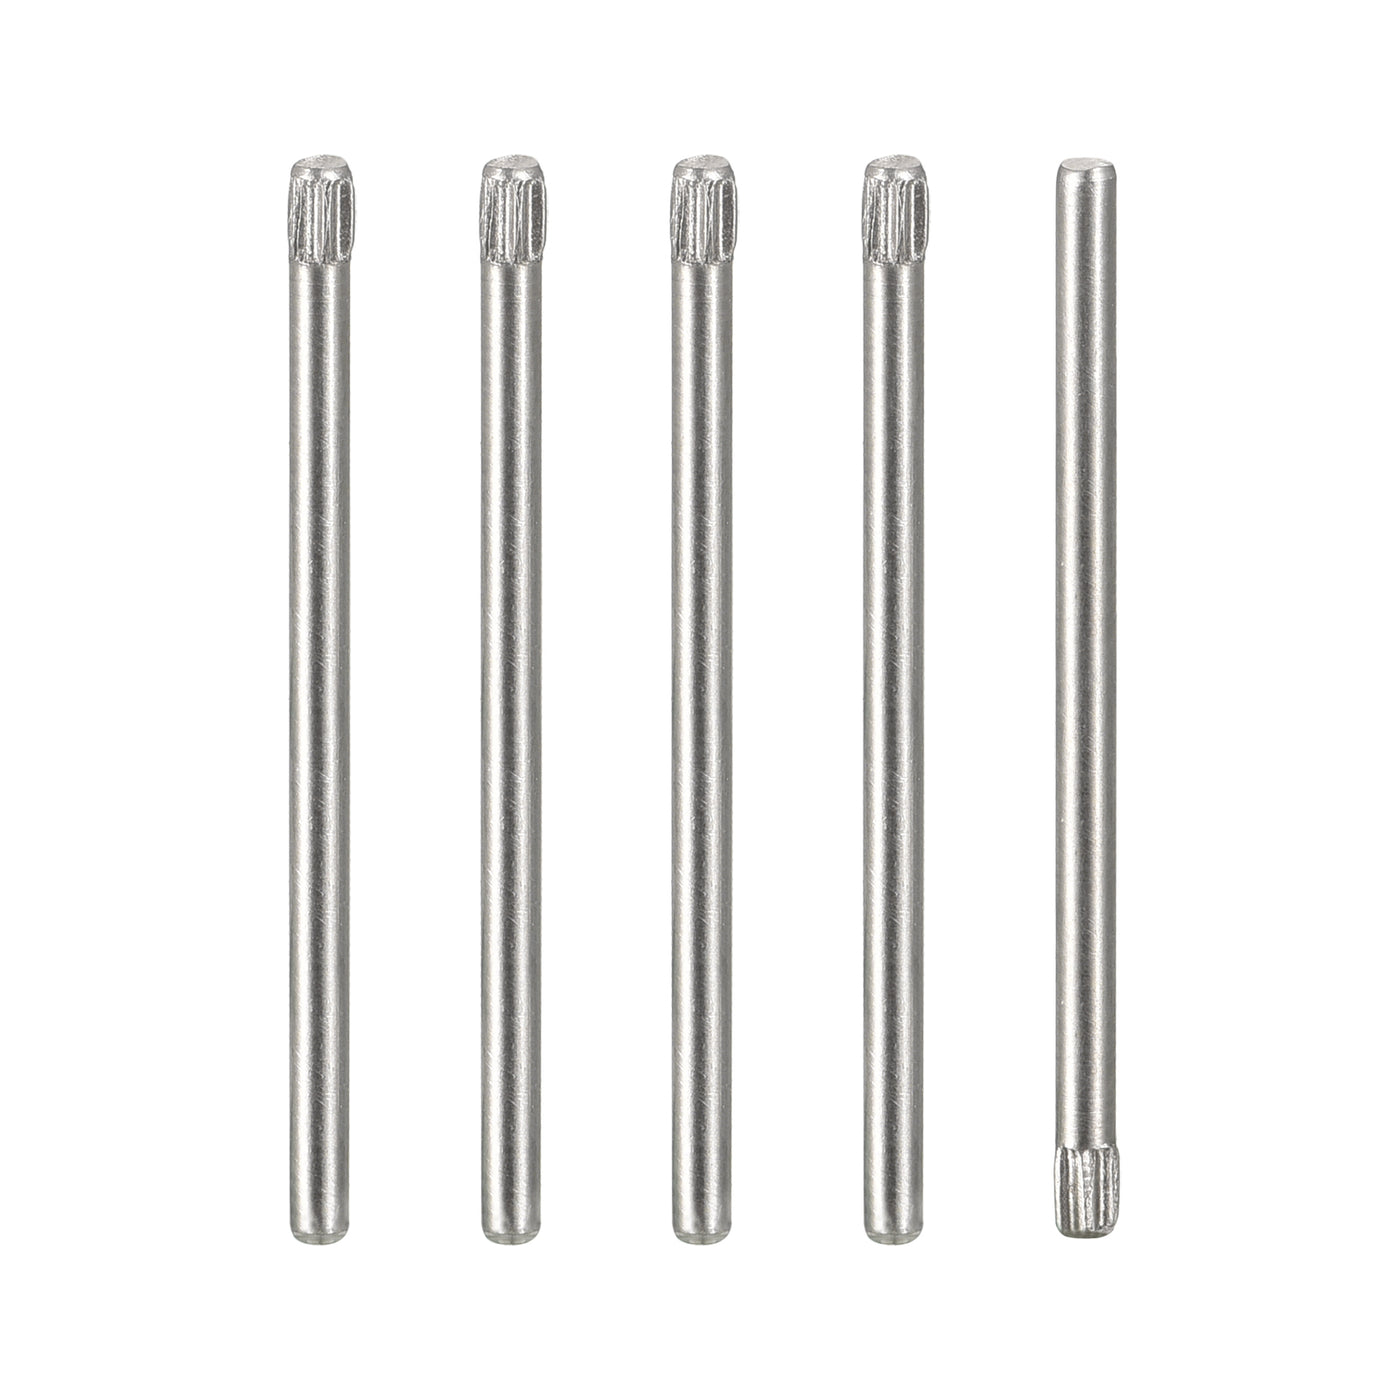 uxcell Uxcell 1.5x30mm 304 Stainless Steel Dowel Pins, 5Pcs Knurled Head Flat End Dowel Pin